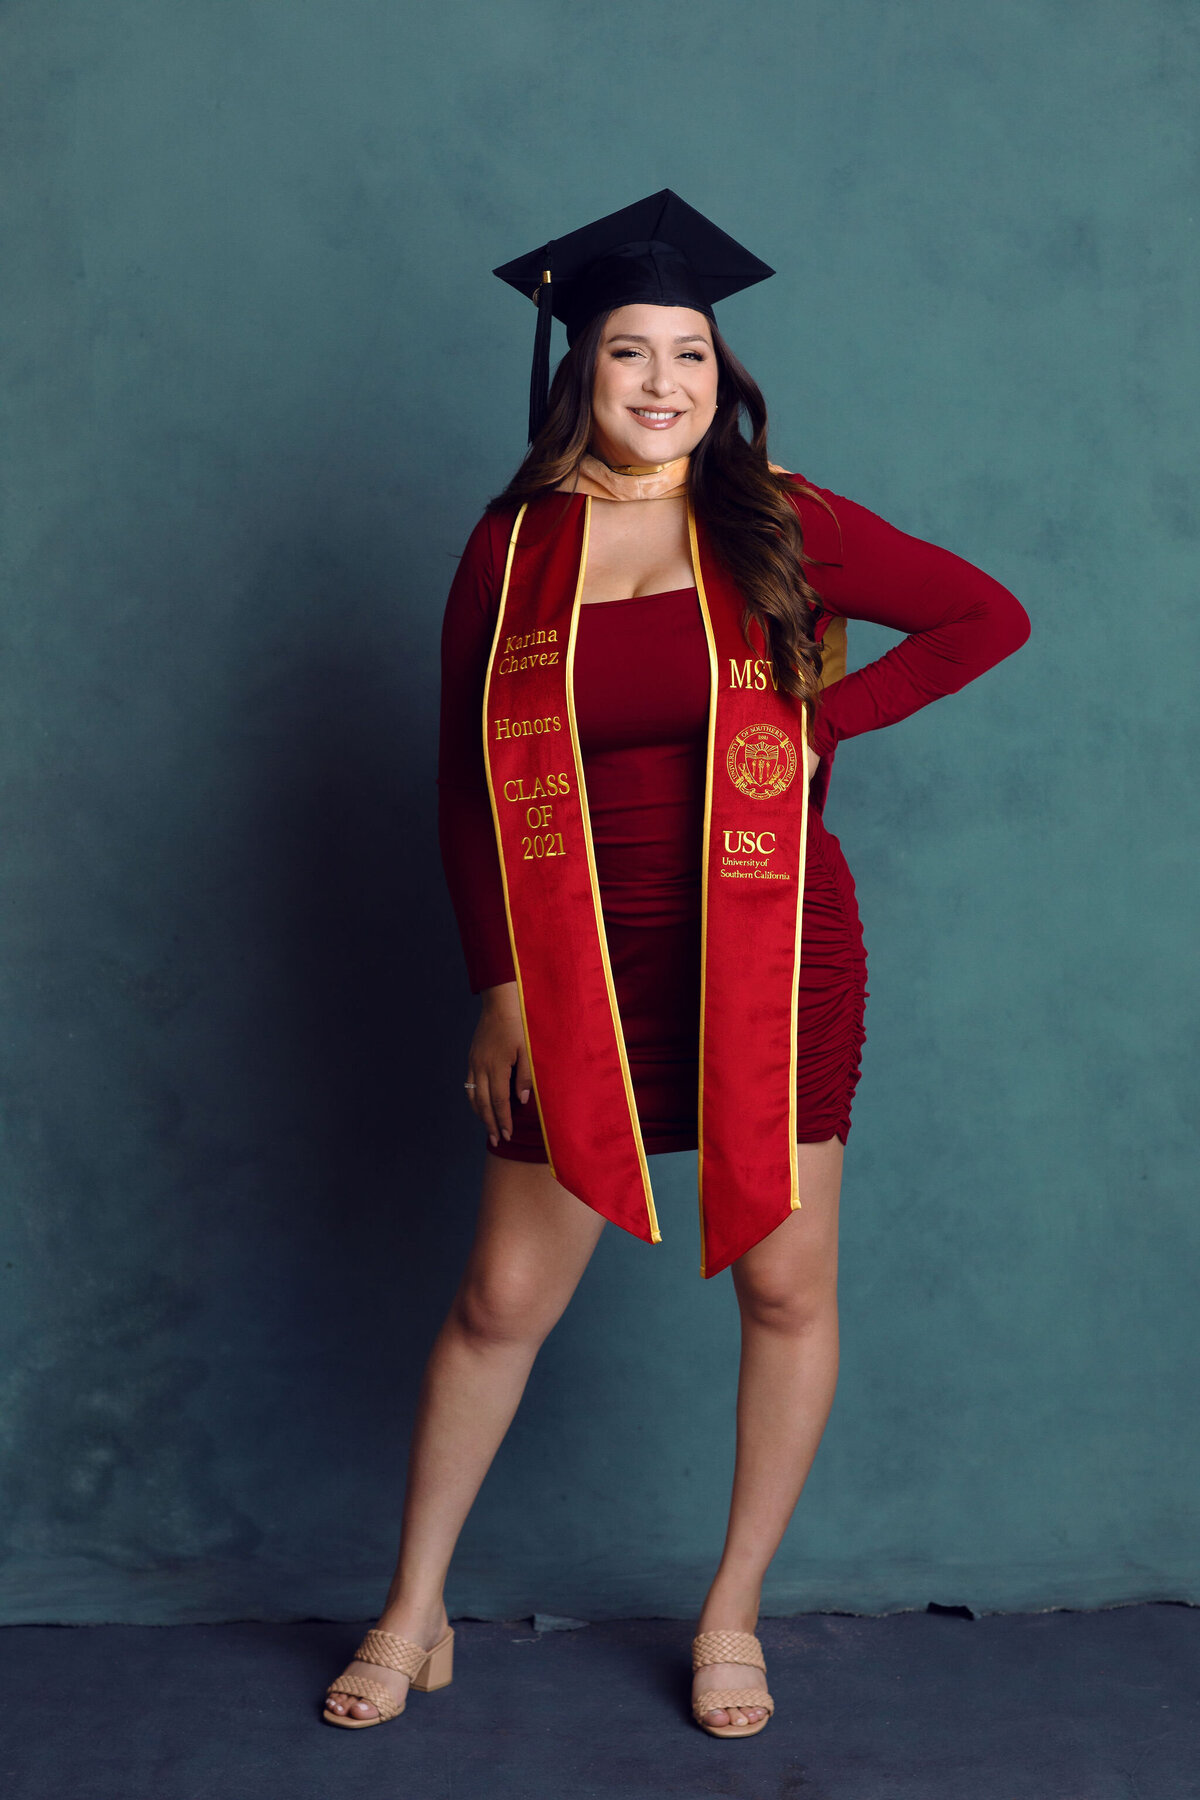 Graduation Portrait Of Young Woman Wearing Red Dress And Black Graduation Cap Los Angeles